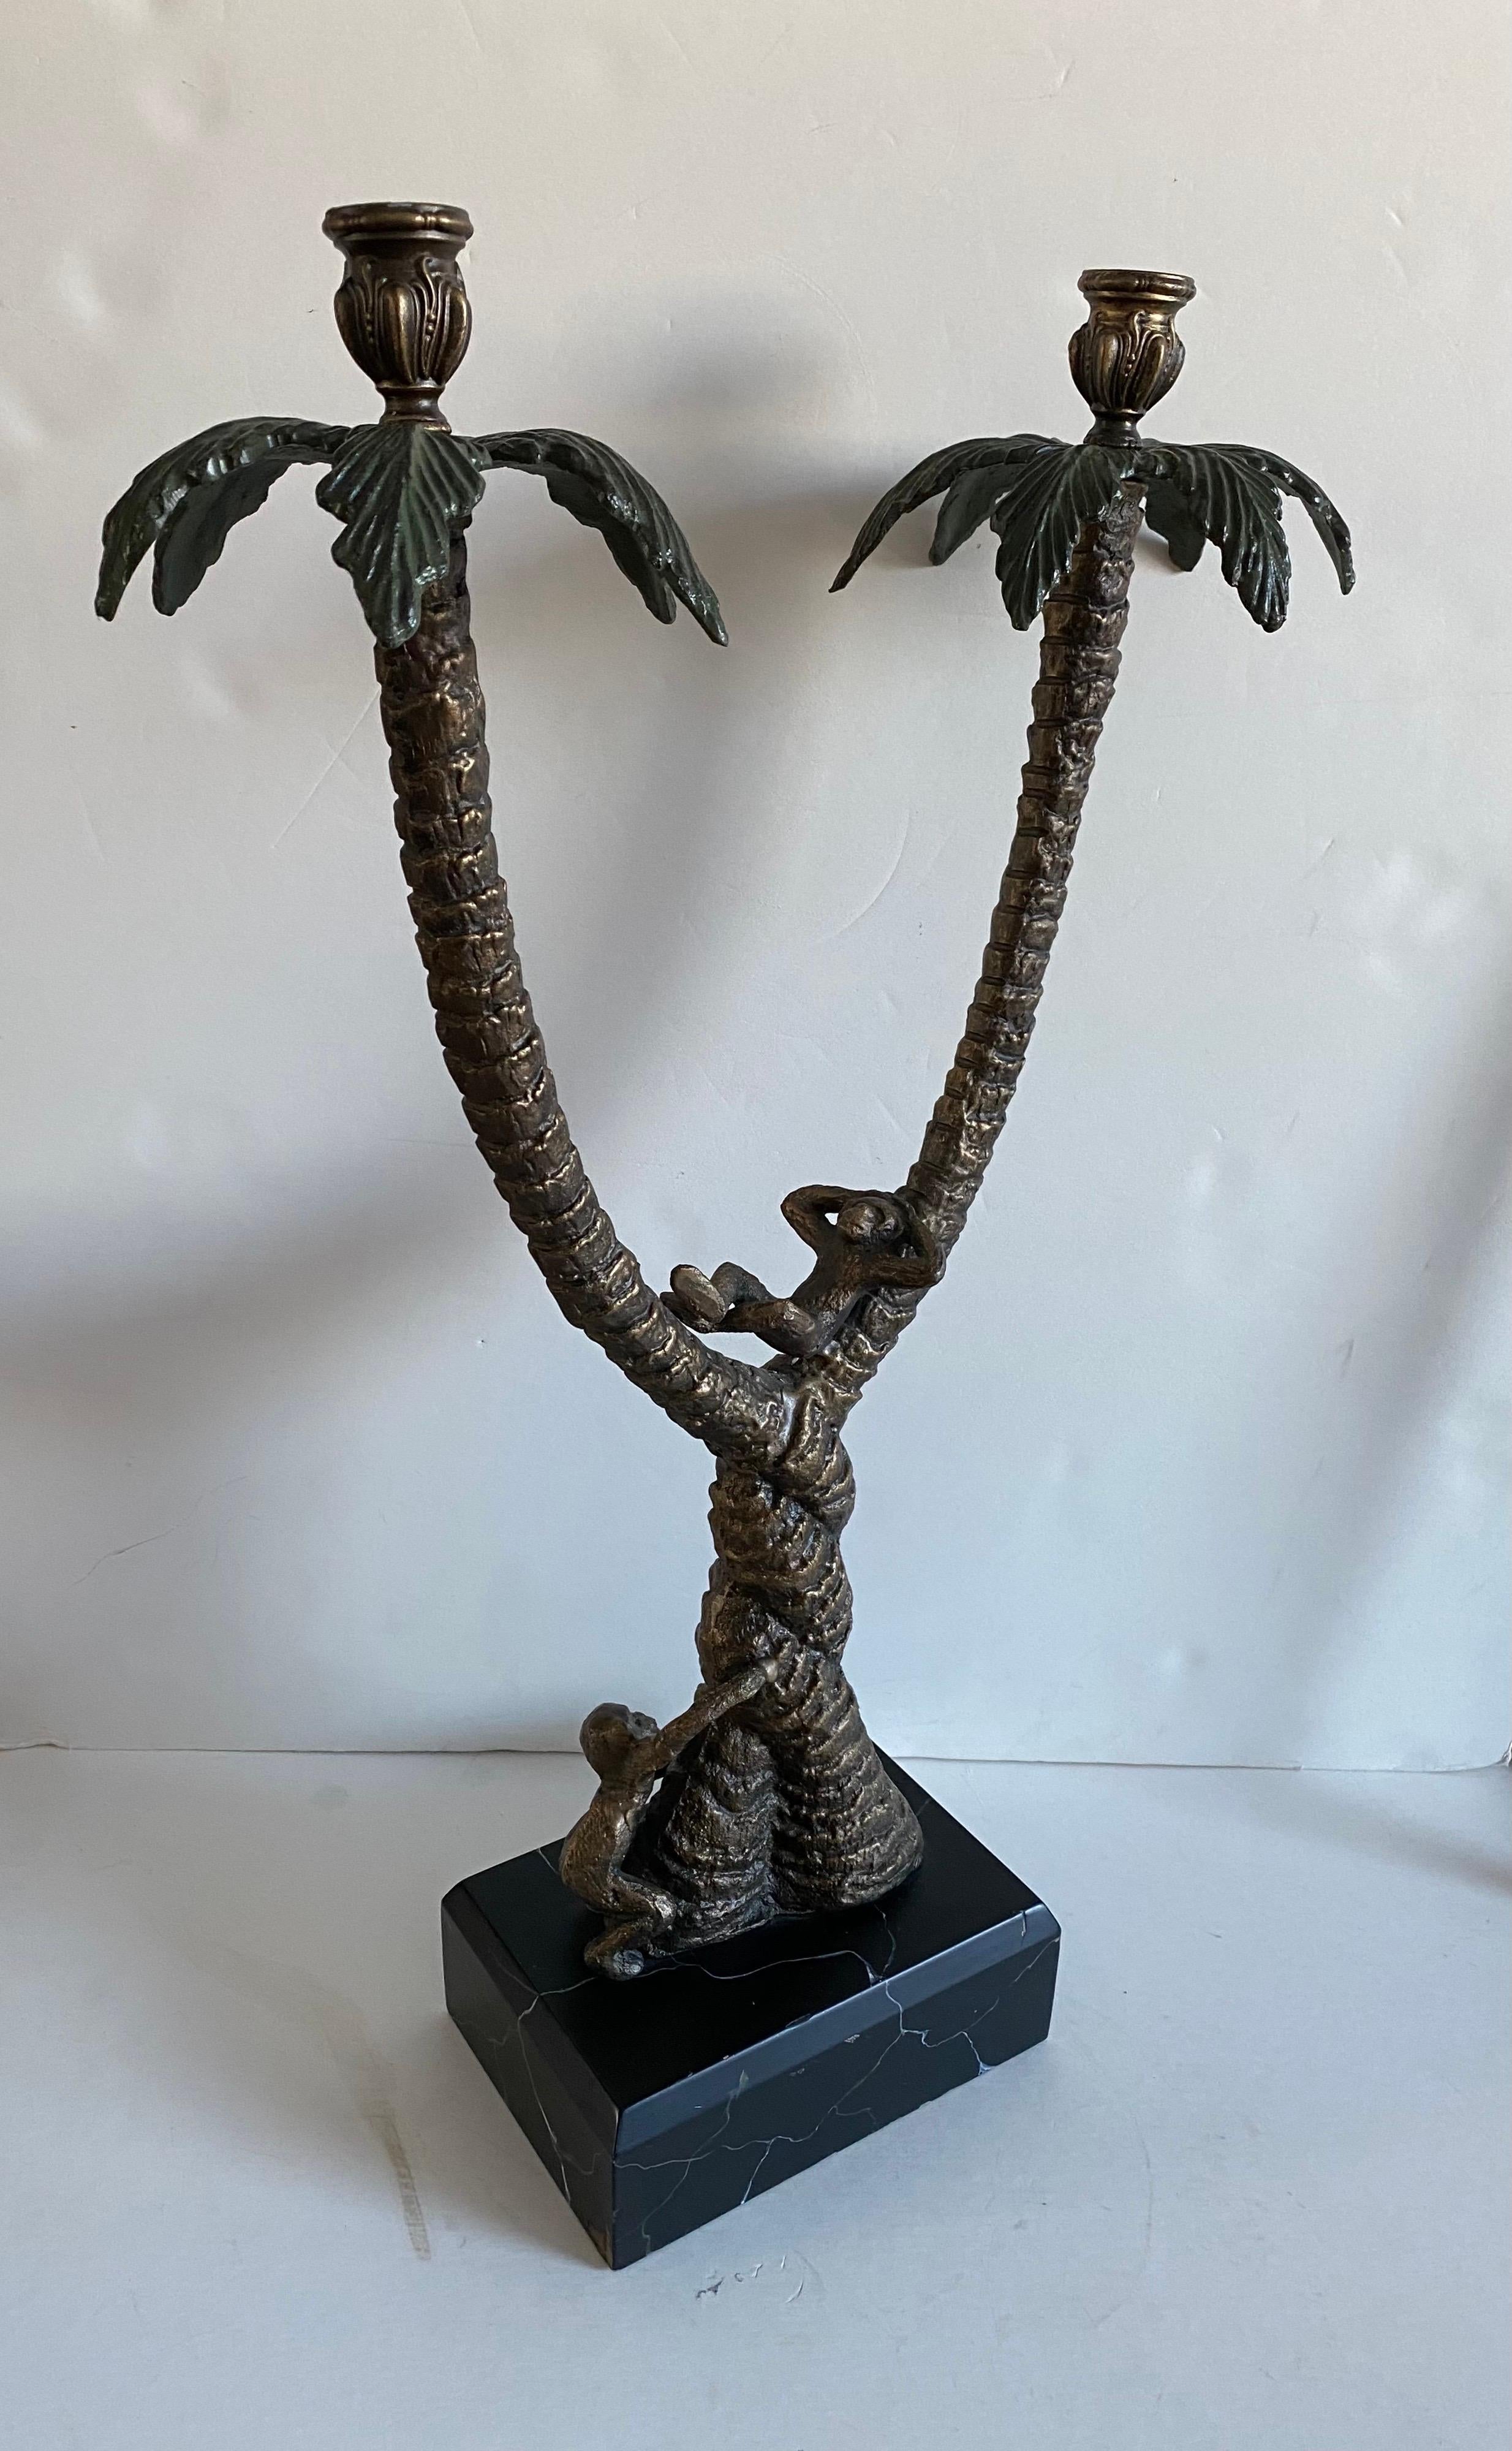 An exquisite Frederick Cooper “Safari Collection” bronze monkey candelabra / candle holder.

Features two arms and a faux marbleized black wood base.

This fine example is made from bronze with meticulous detail, with a pair of monkeys playfully